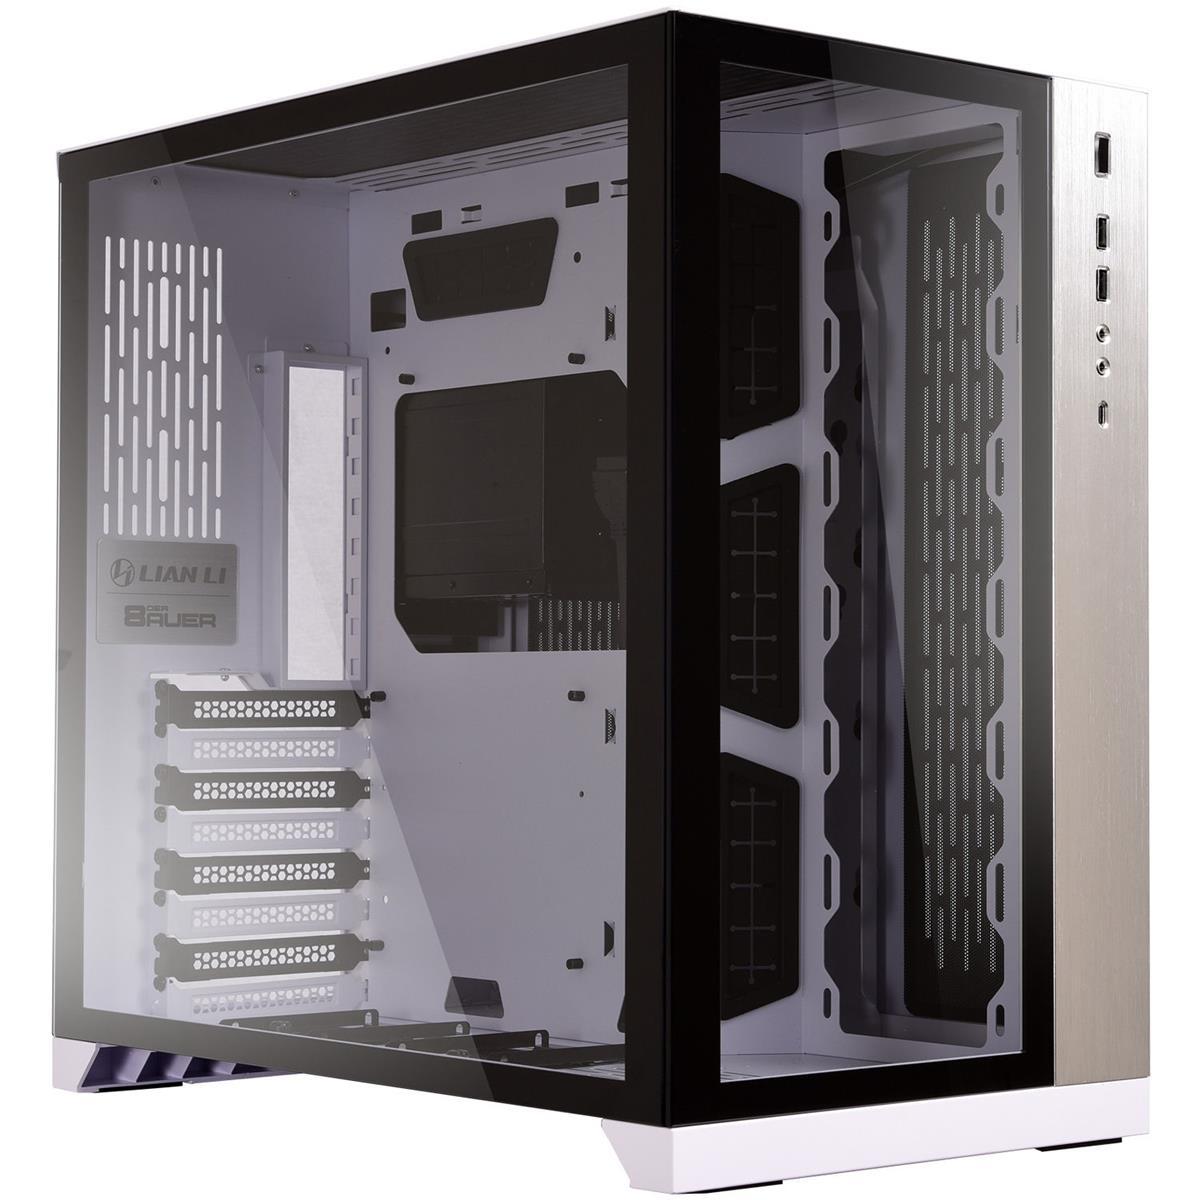 Lian-Li PC-O11DW Dynamic Mid Tower Tempered Glass Computer Case for $126.99 Shipped